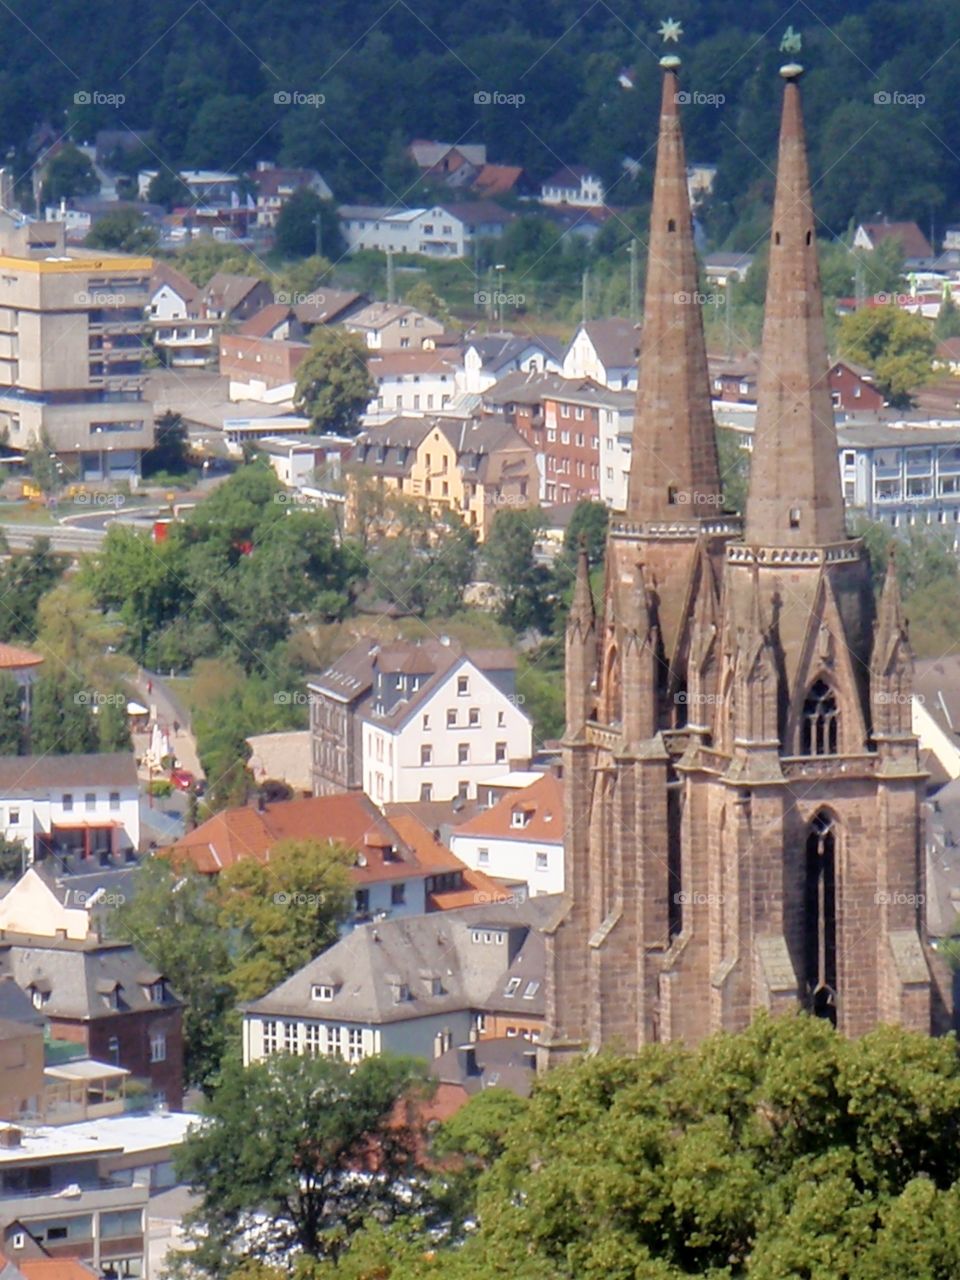 The Cathedral . A church in Marburg